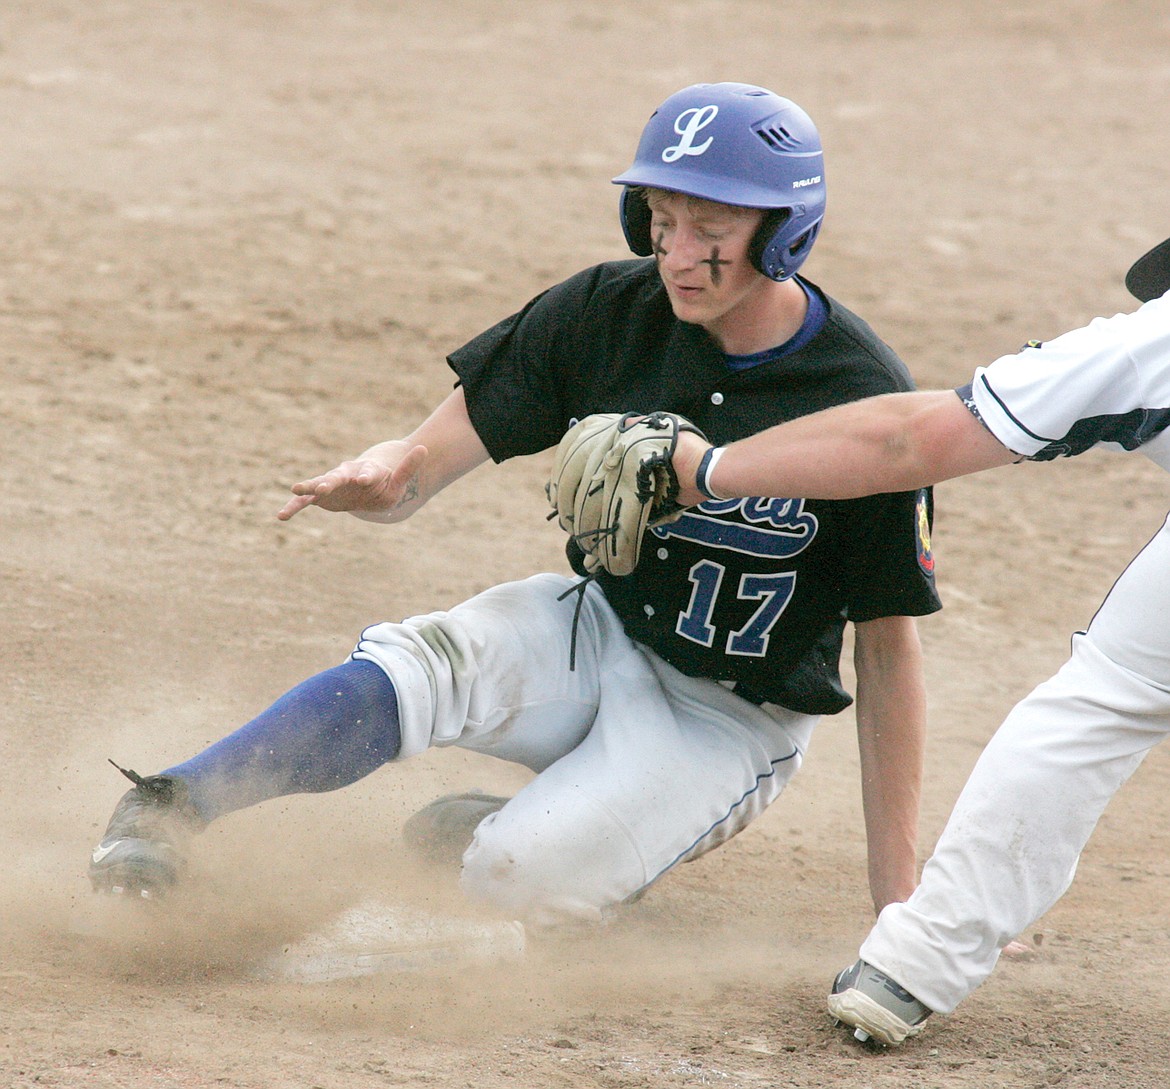 Ethan Borden steals second then advances safely to third on a fielding error narrowly escaping the tag of third baseman Andrew Scully. Bitterroot Bucs over Loggers 13-2 in Sunday's Big Bucks championship game. (Paul Sievers/The Western News)